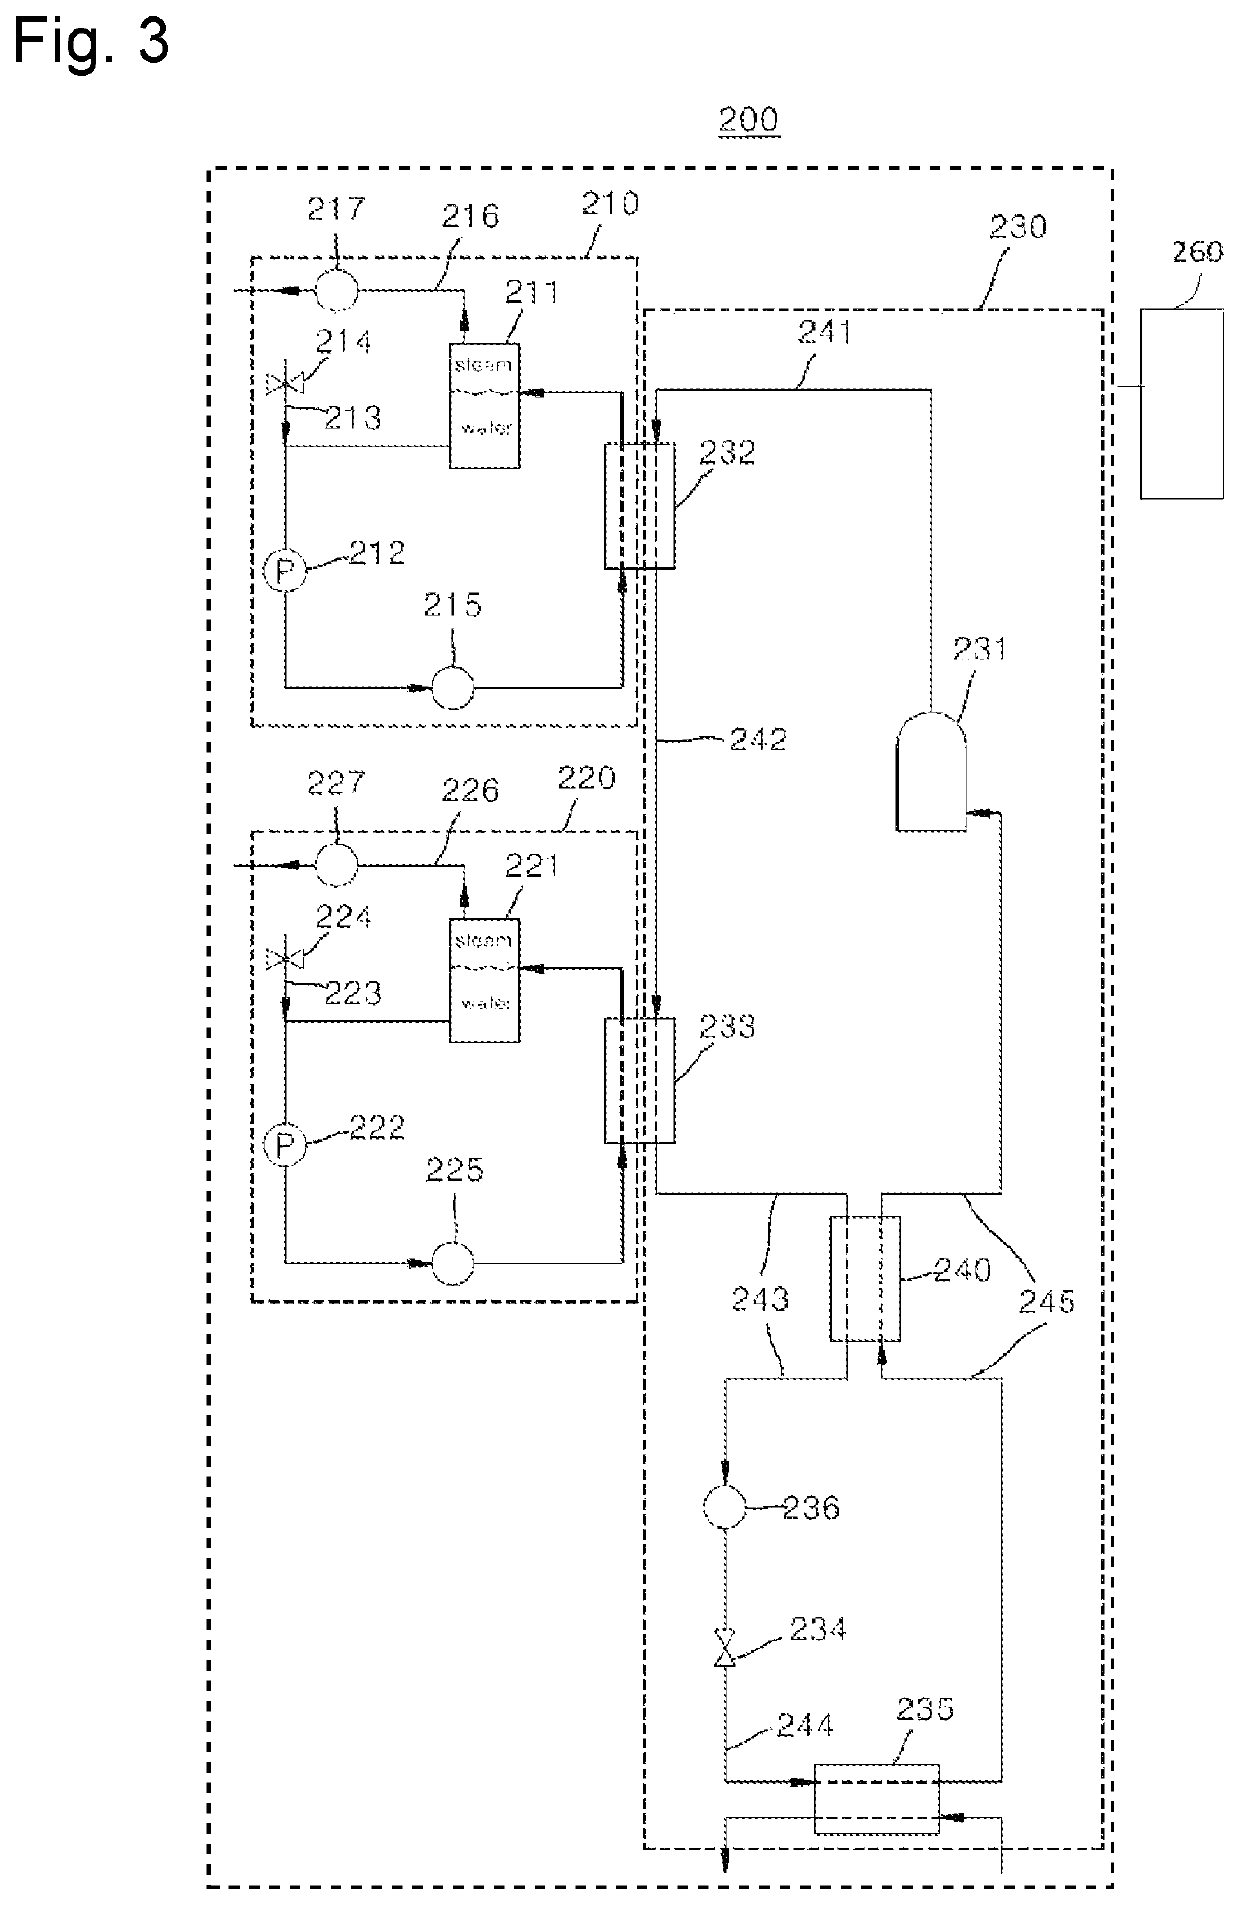 Heat pump system for producing steam by using recuperator